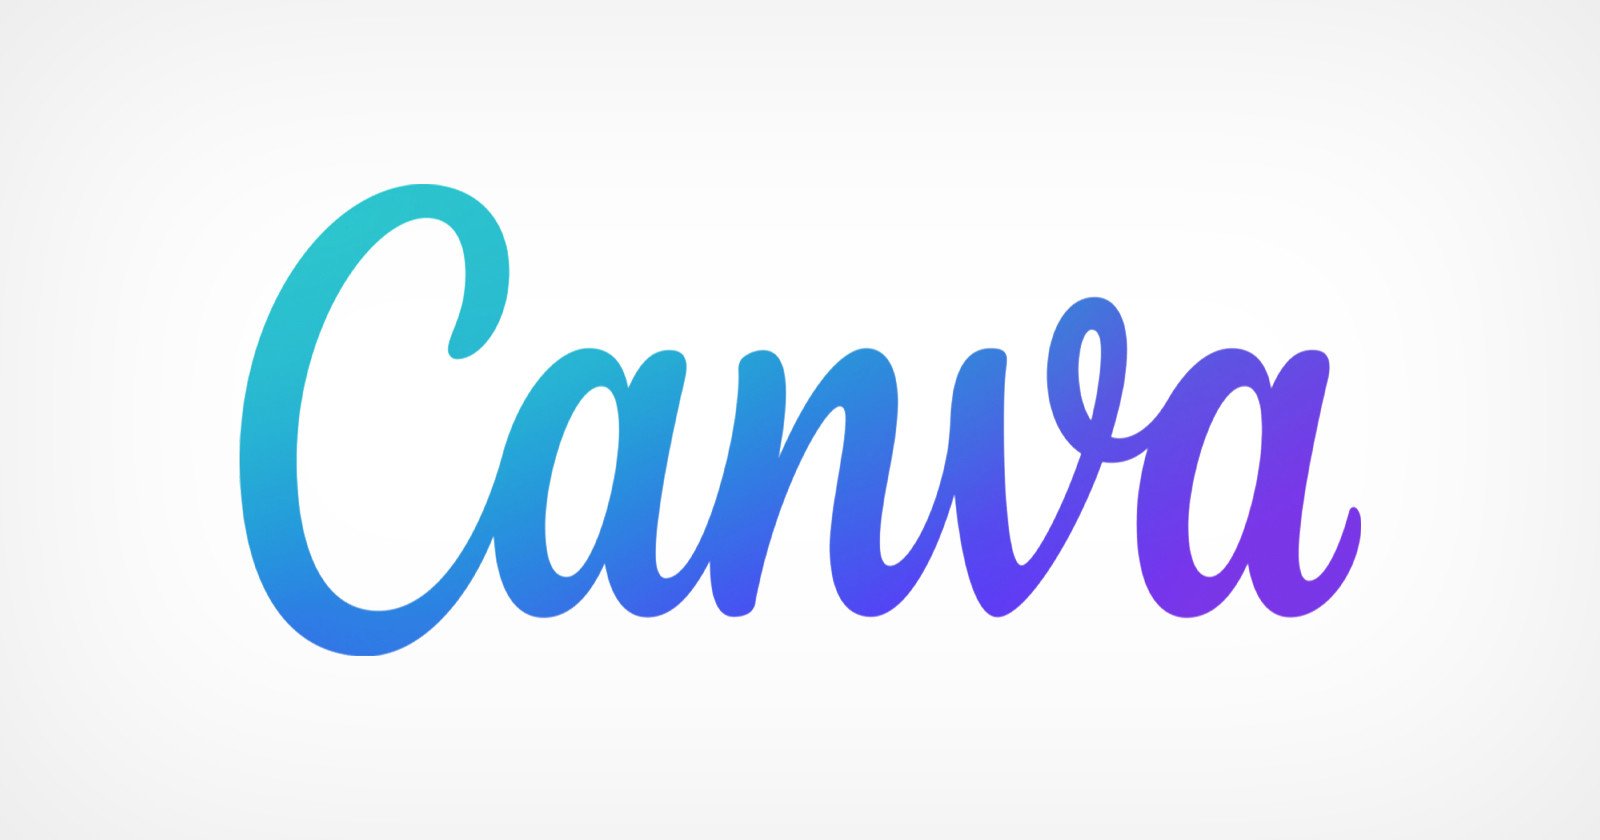 Canva Passes 100 Million Monthly Active Users, Nearly 4x That of Adobe